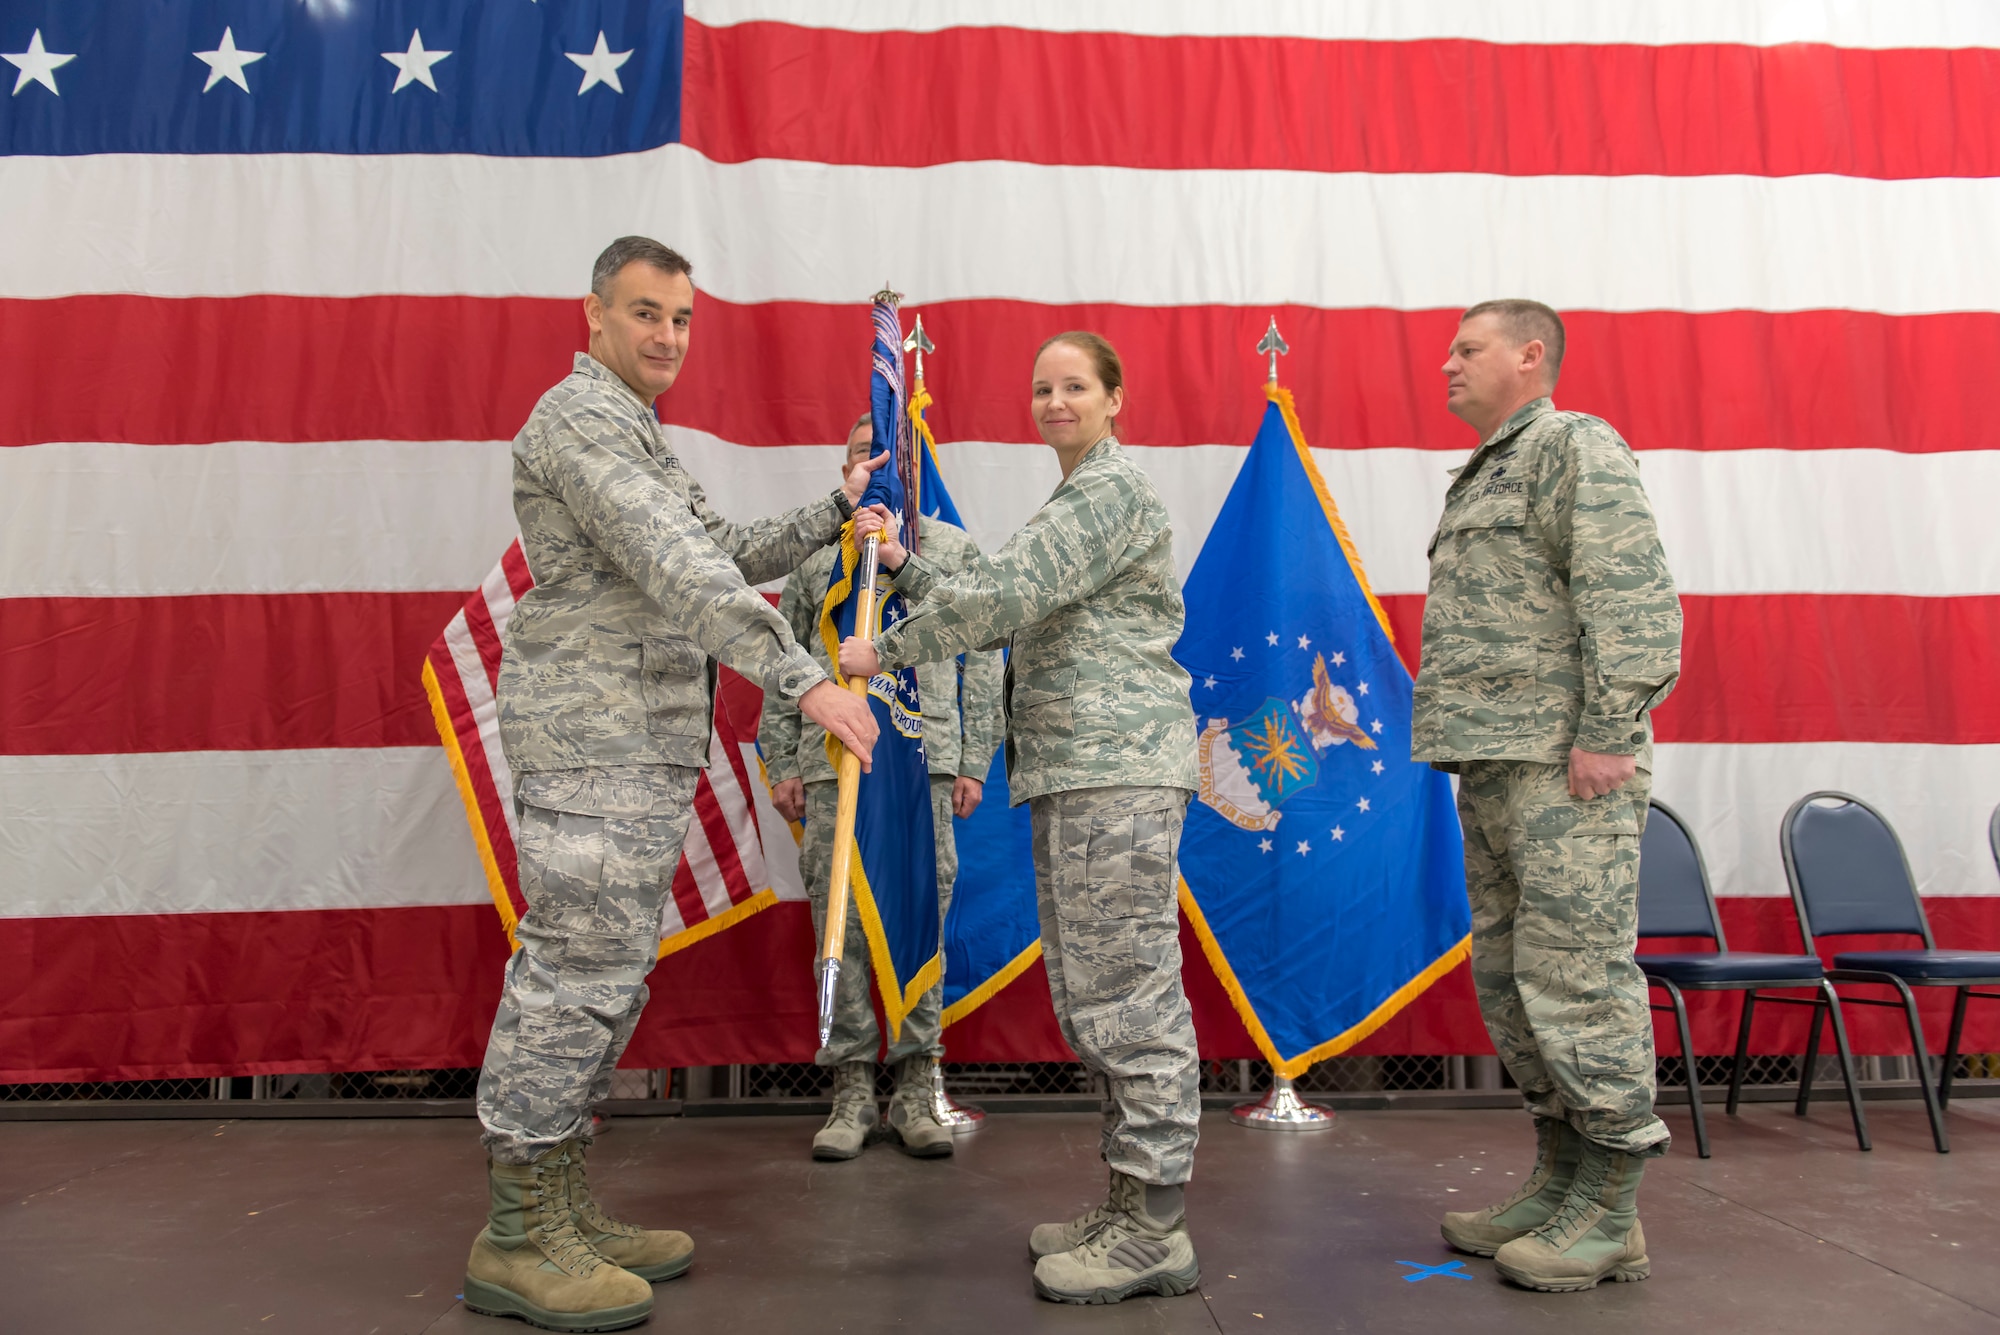 Col. Erik Peterson, the commander of the 115th Fighter Wing, presents the guidon to Lt. Col. Wilhelmina Panzer, the new commander of the 115th Maintenance Group, during the 115 MXG change of command ceremony Dec. 2, 2018, at the 115th Fighter Wing, Truax Field, Wisconsin. Lt. Col. Panzer was previously the inspector general at the 115th Fighter Wing before taking command of the maintenance group.  (U.S. Air National Guard photo by Airman 1st Class Cameron Lewis)